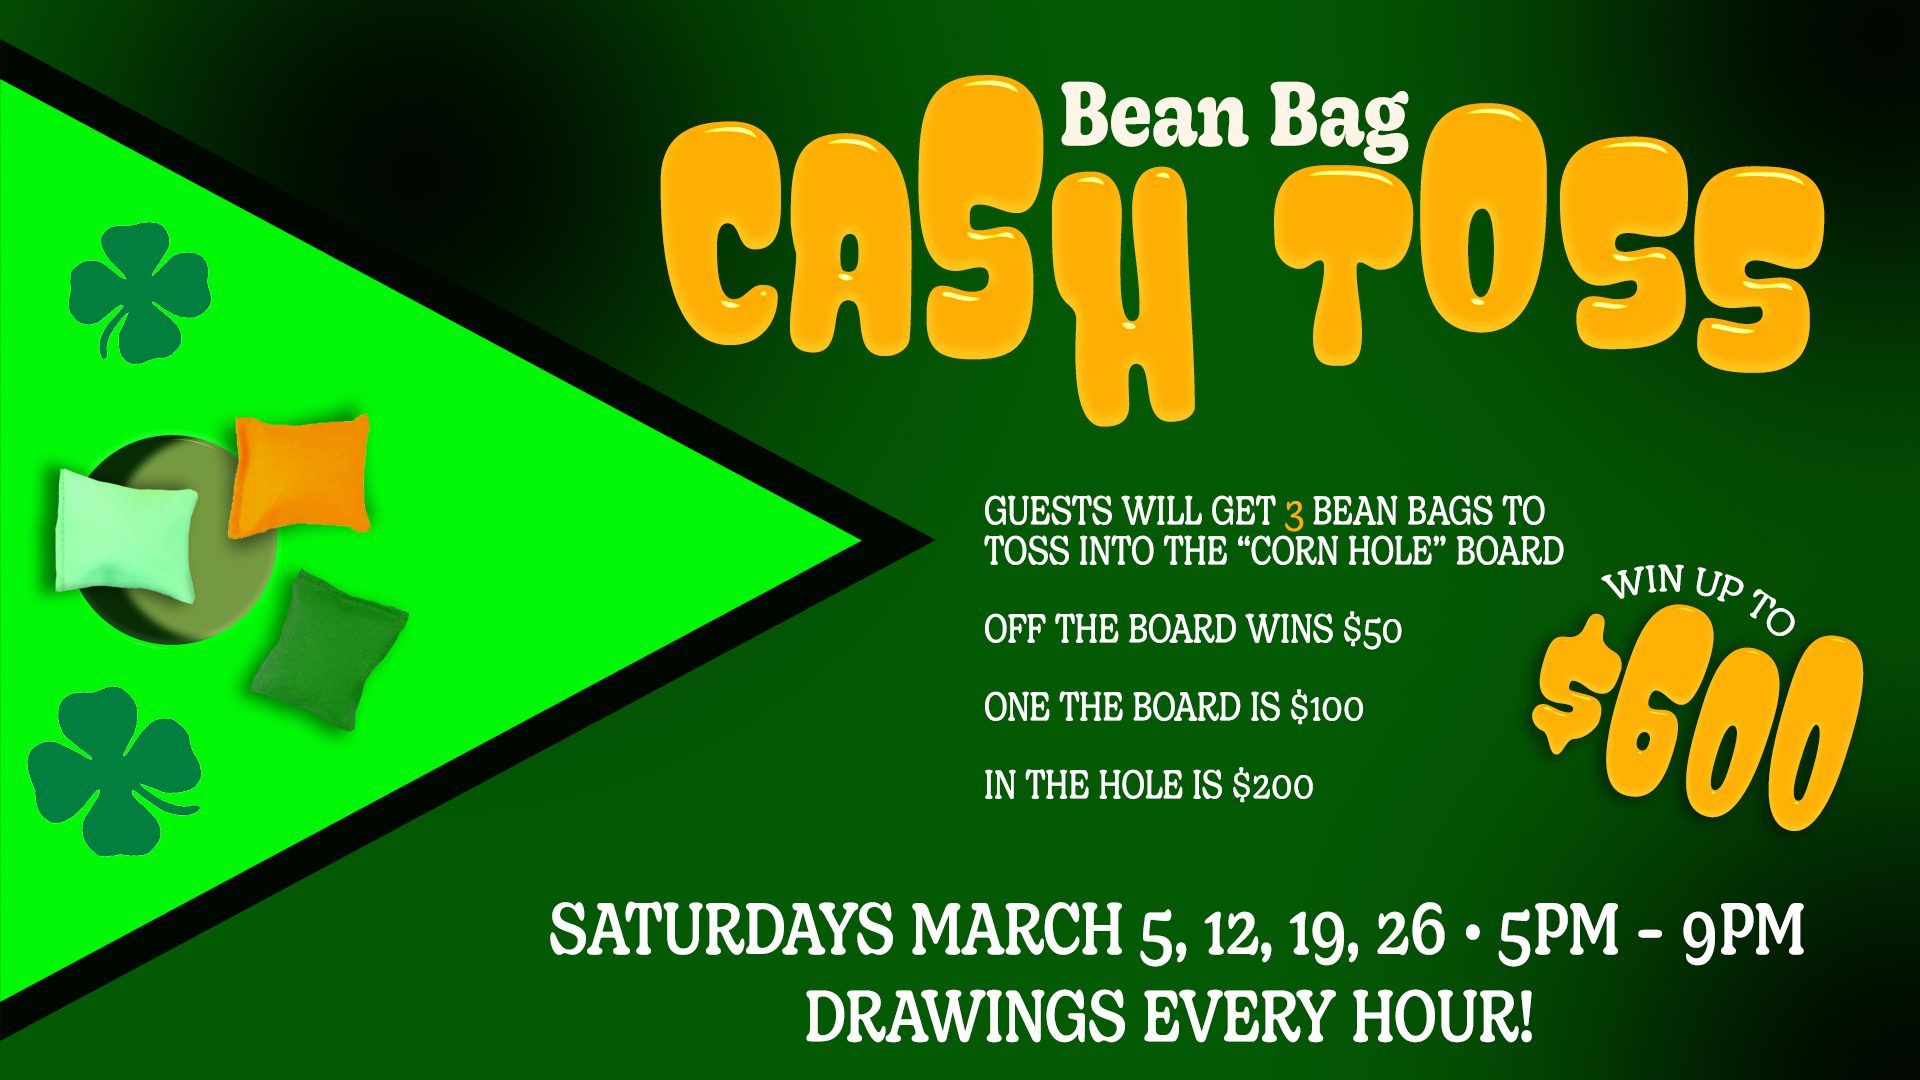 Promotional poster for a "bean bag cash toss" event with potential winnings up to $600, held on saturdays in march with hourly drawings.